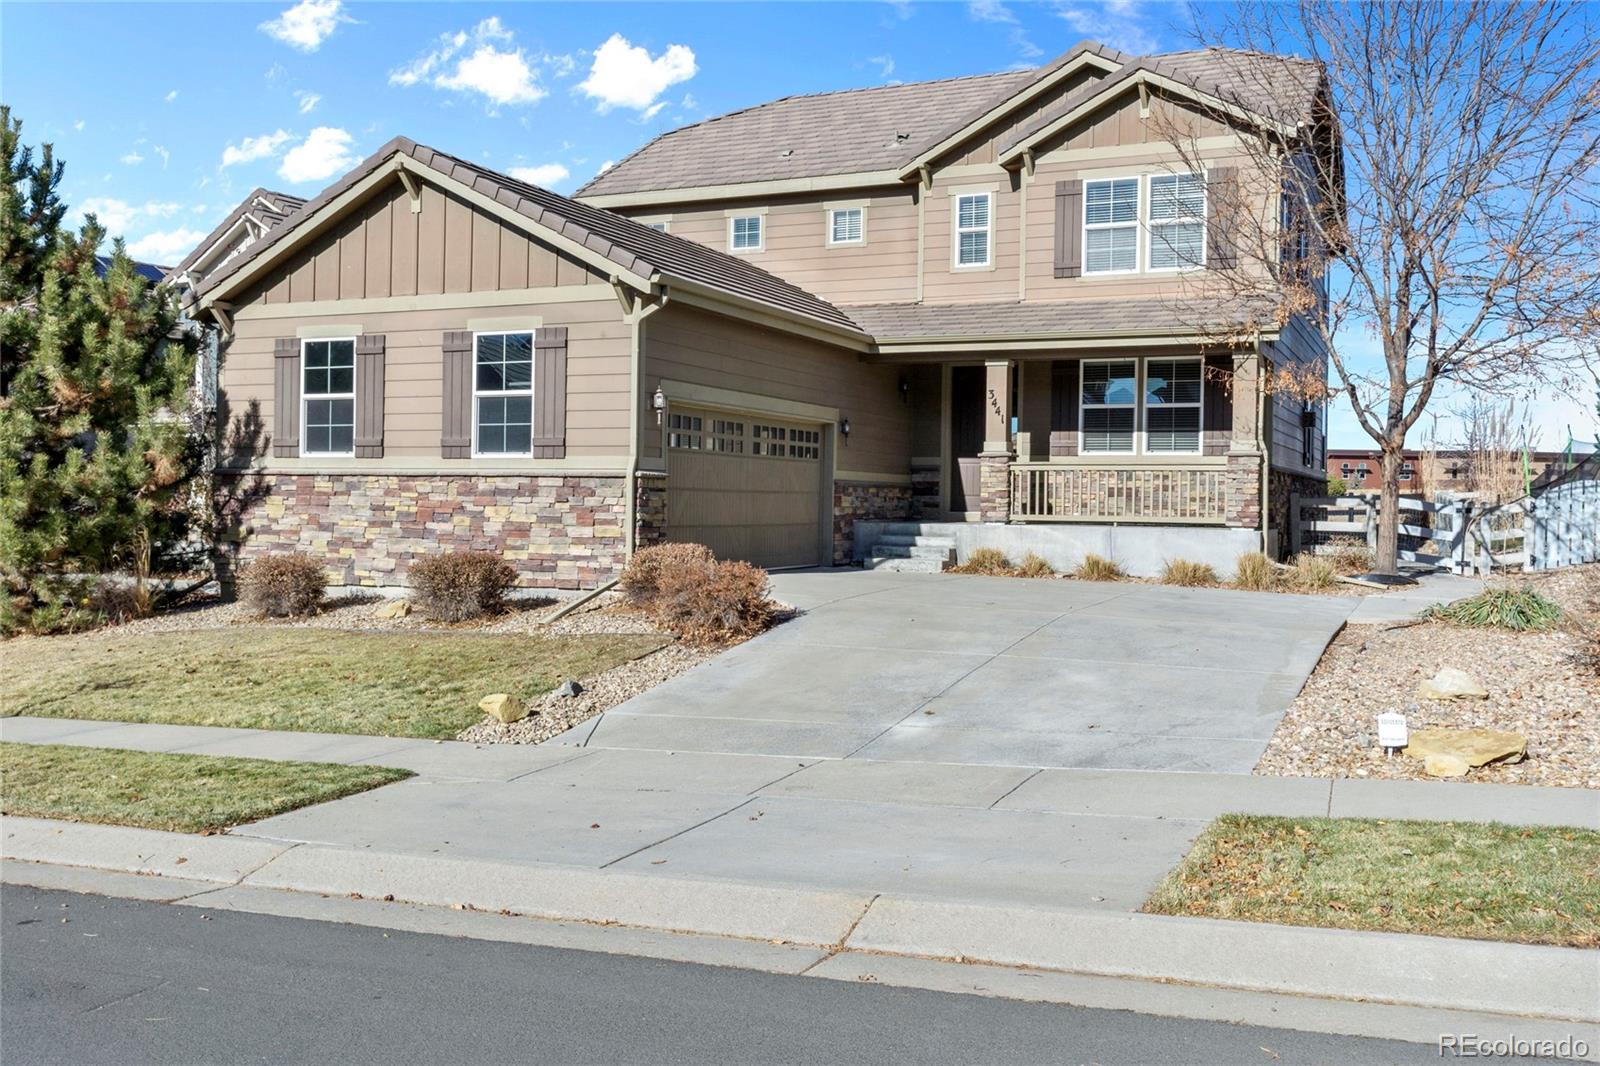 Report Image for 3441  Harvard Place,Broomfield, Colorado